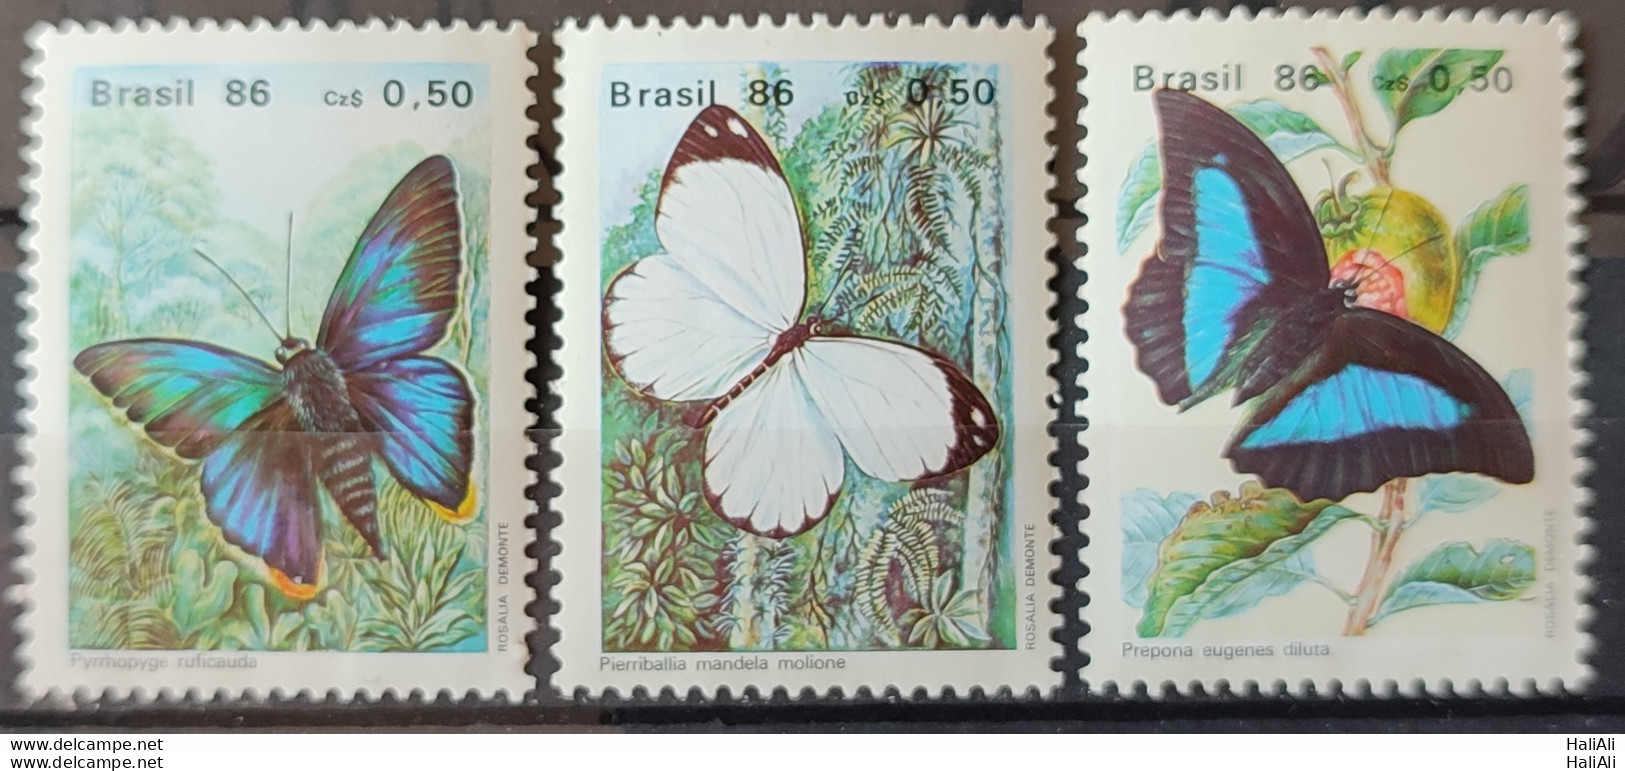 C 1512 Brazil Stamp Butterfly Insects 1986 Complete Series 2.jpg - Neufs